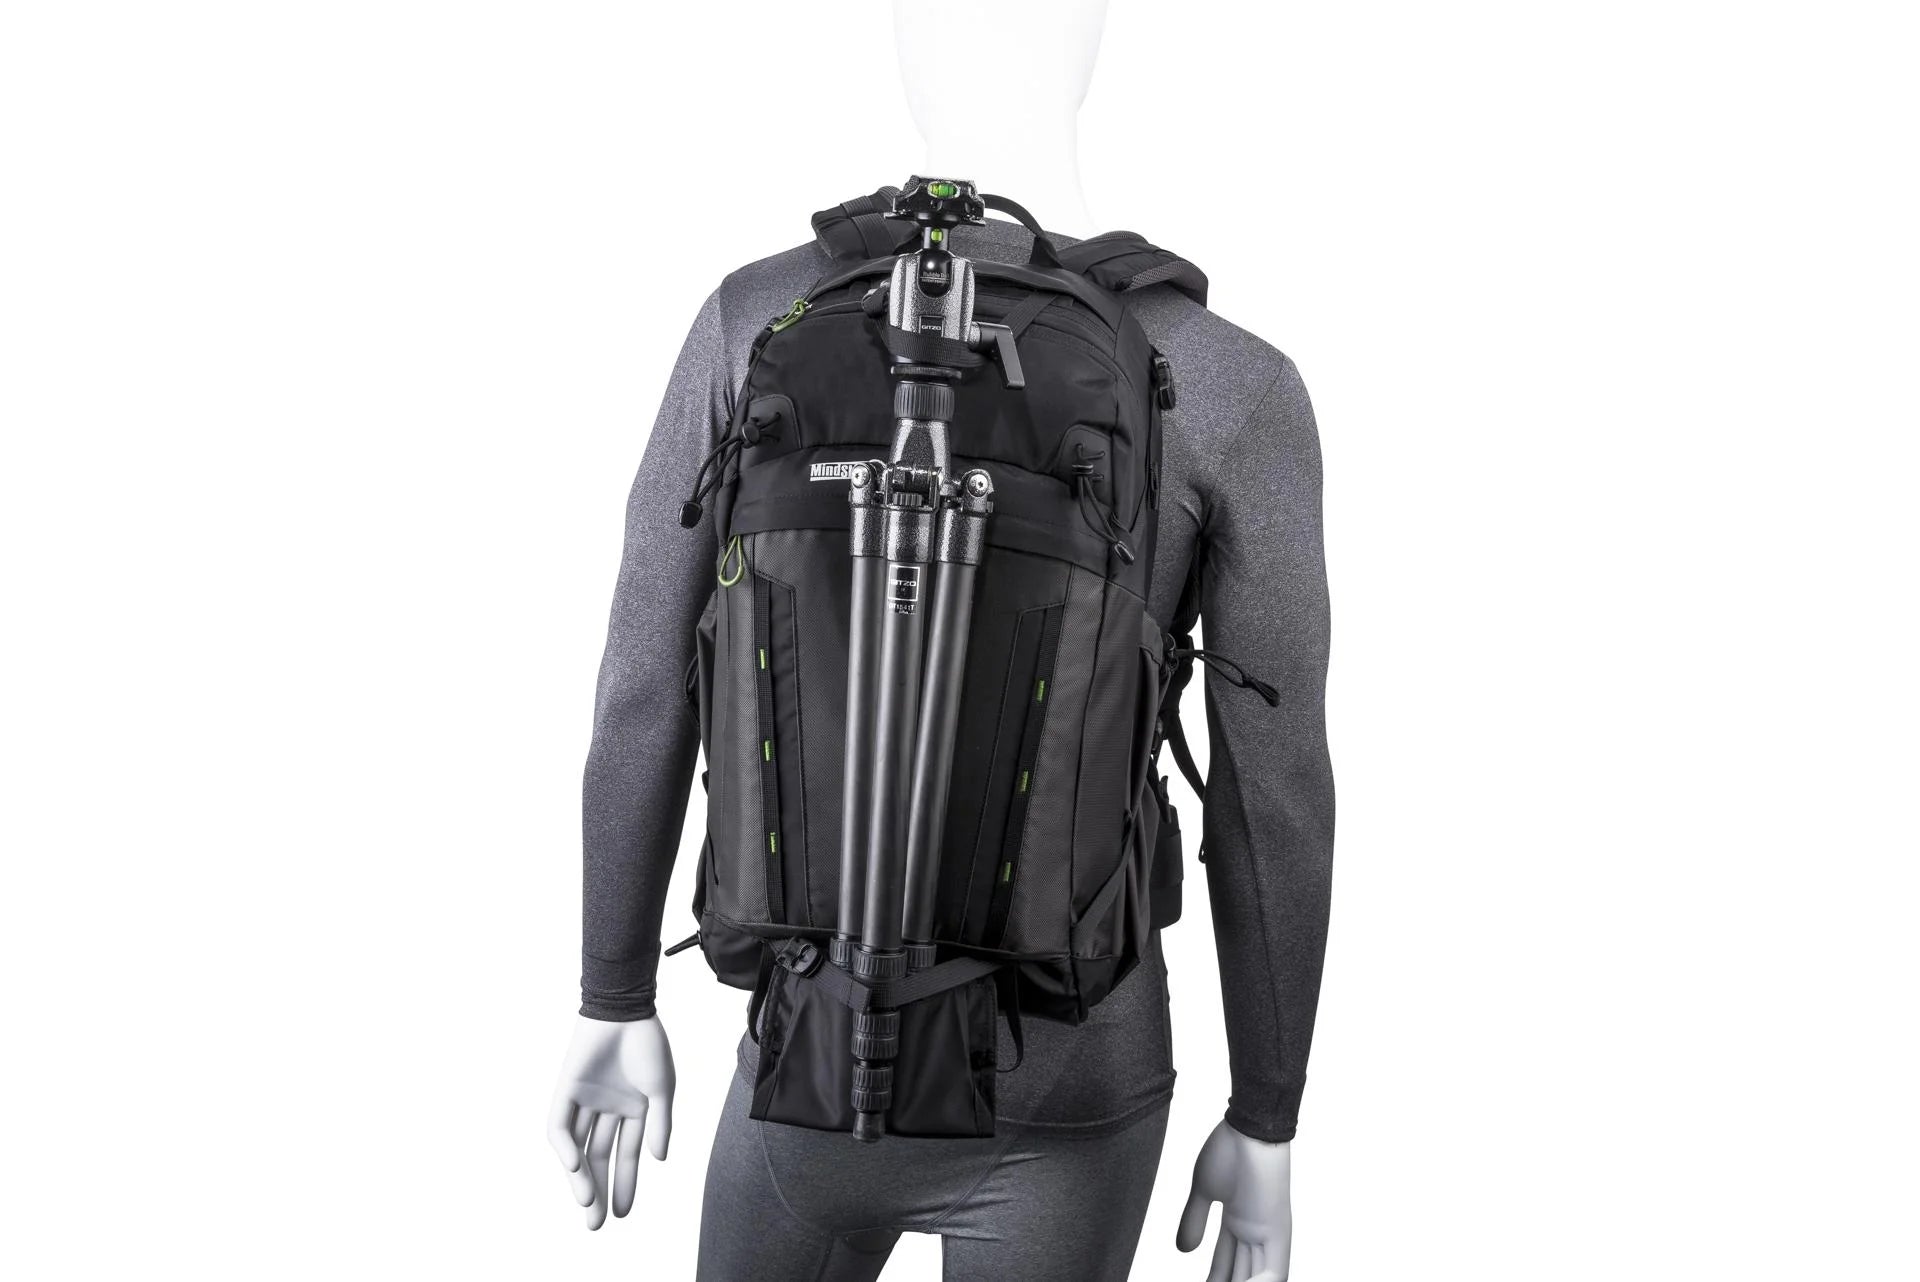 Mindshift Gear MSG360 BackLight 26L Photo Daypack - Charcoal